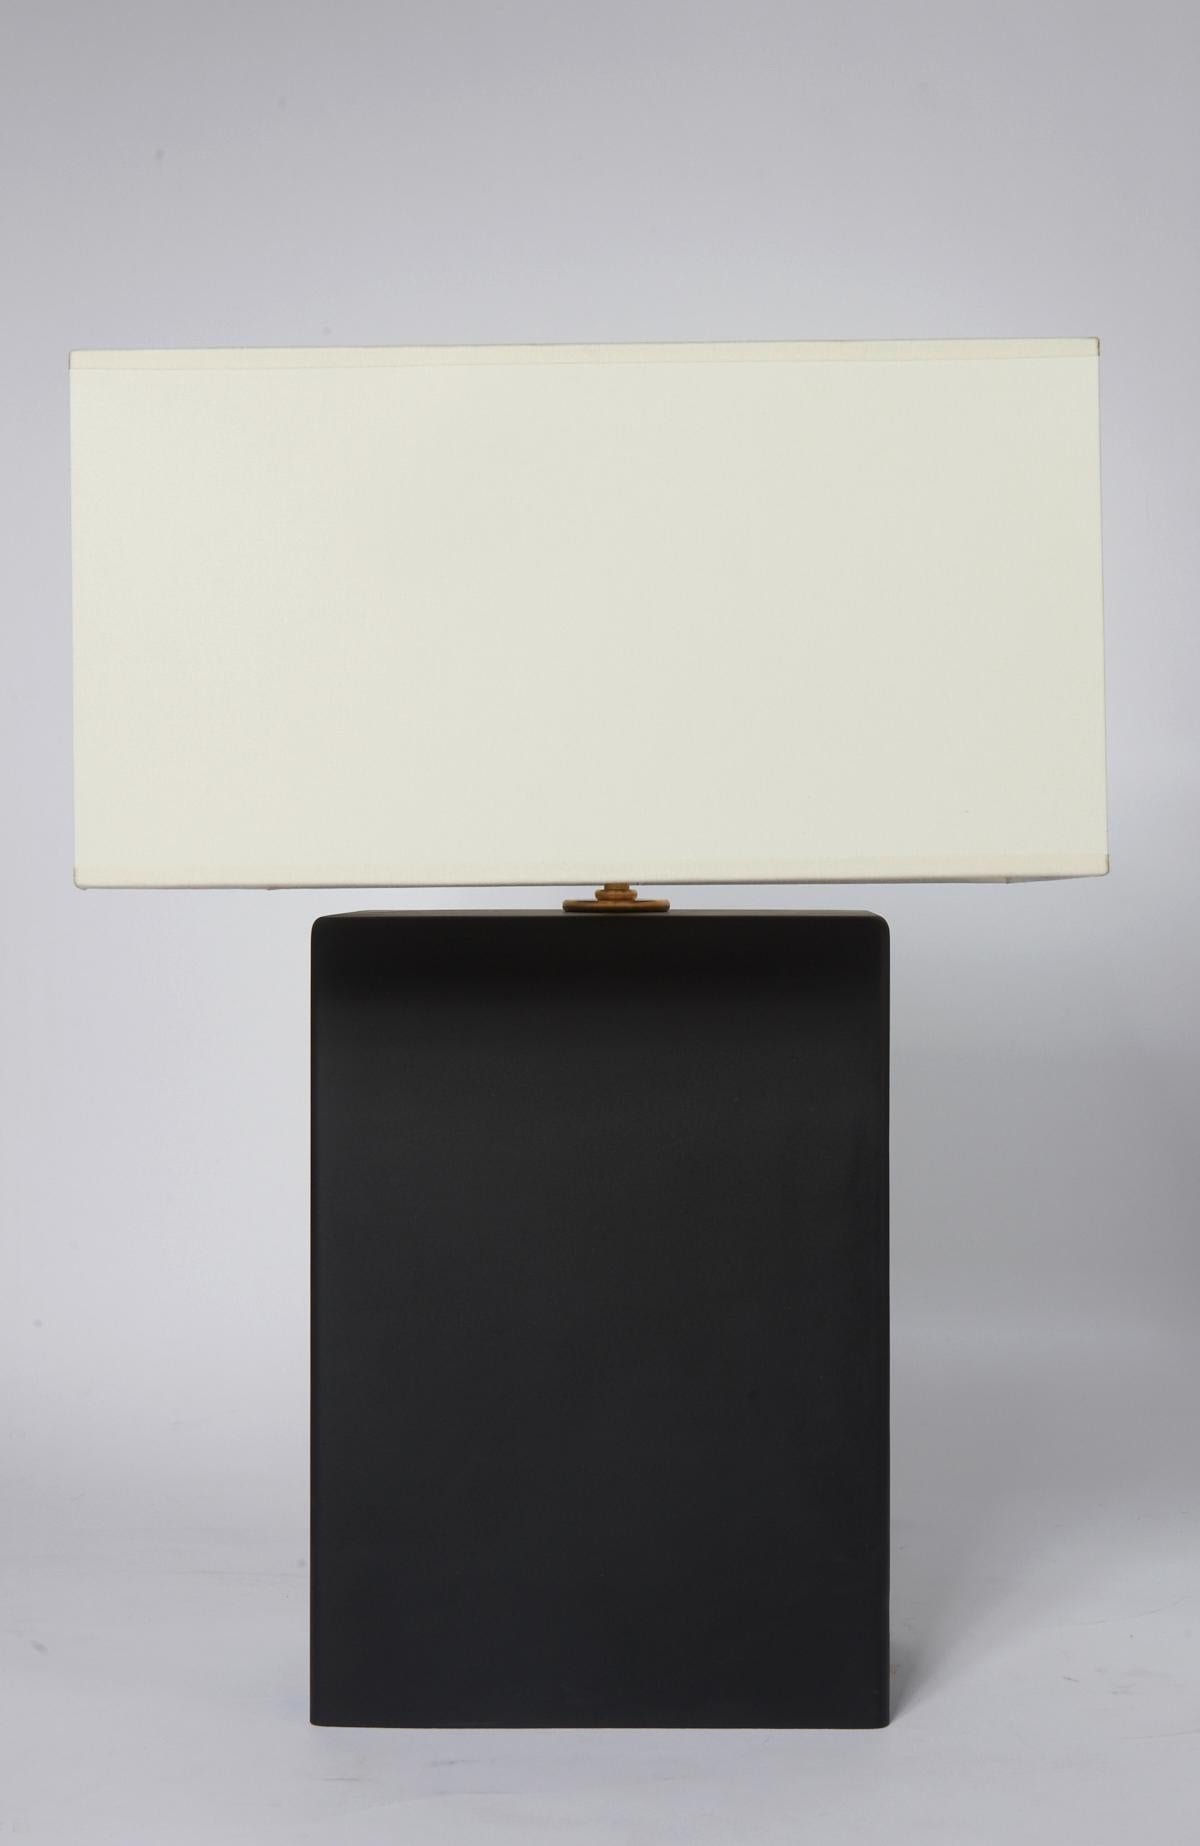 Pair of rectangle shaped table lamps made of glass in mat black with brass hardware.